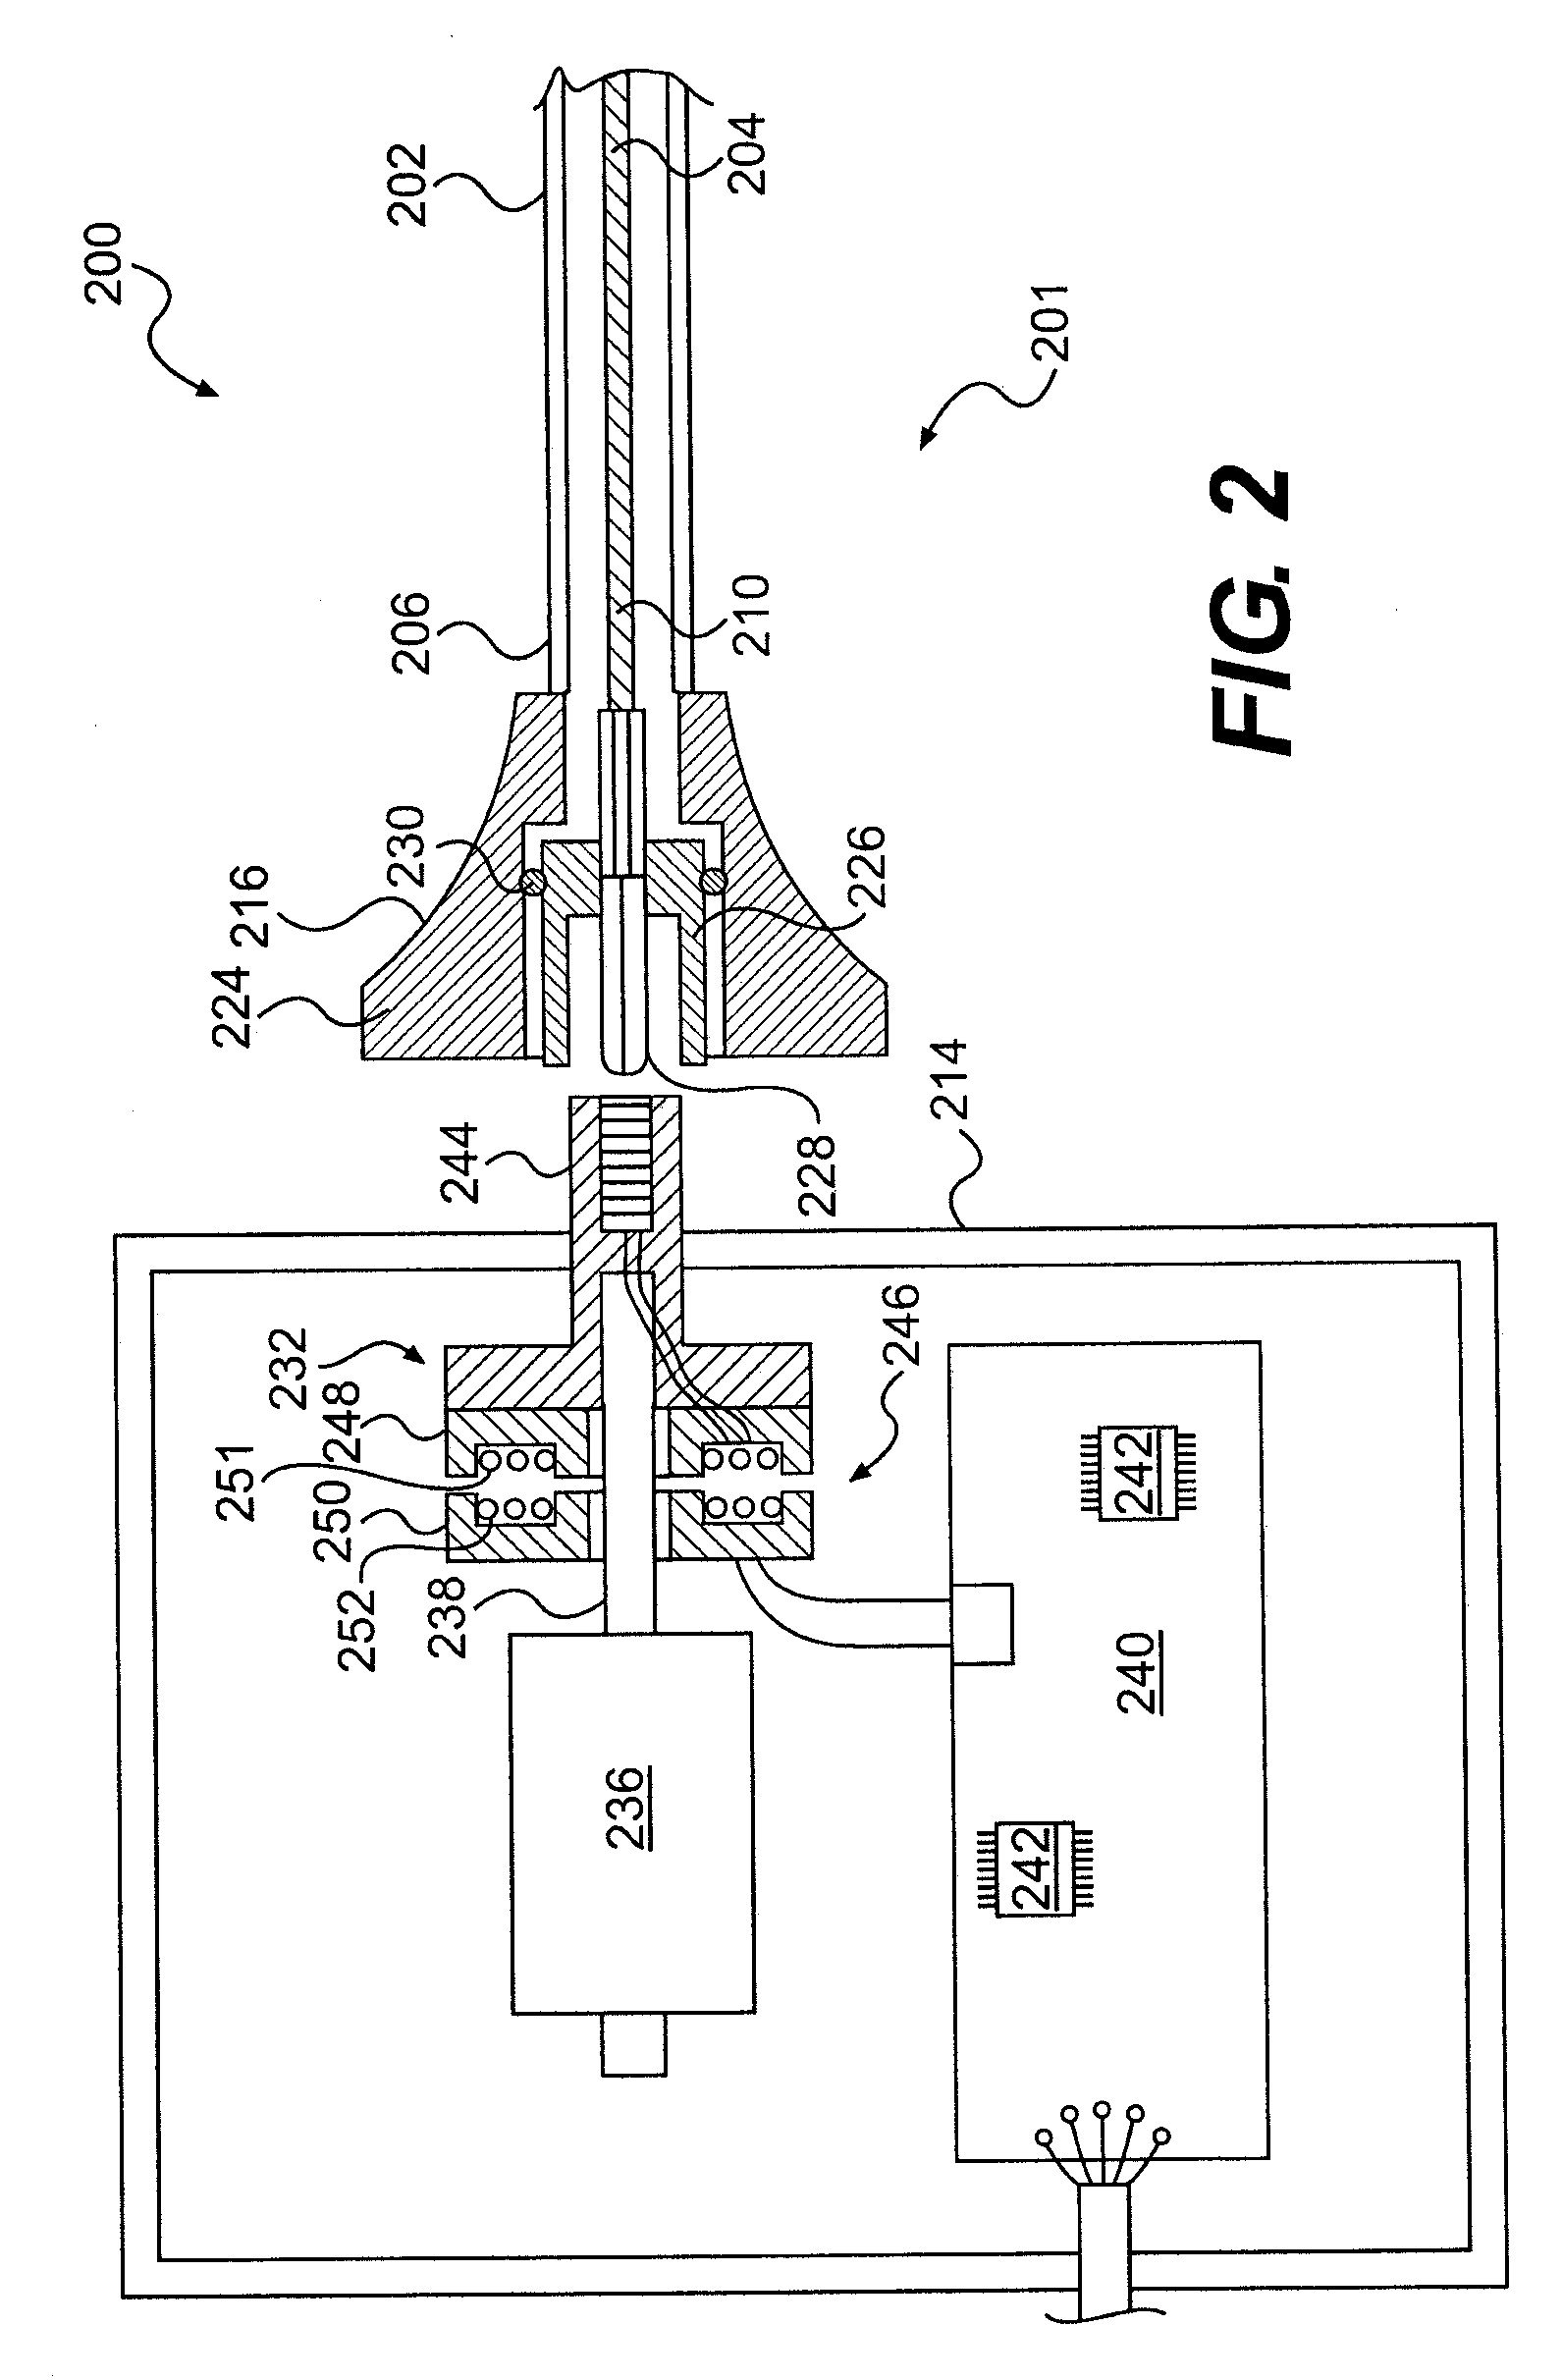 Rotational intravascular ultrasound probe with an active spinning element